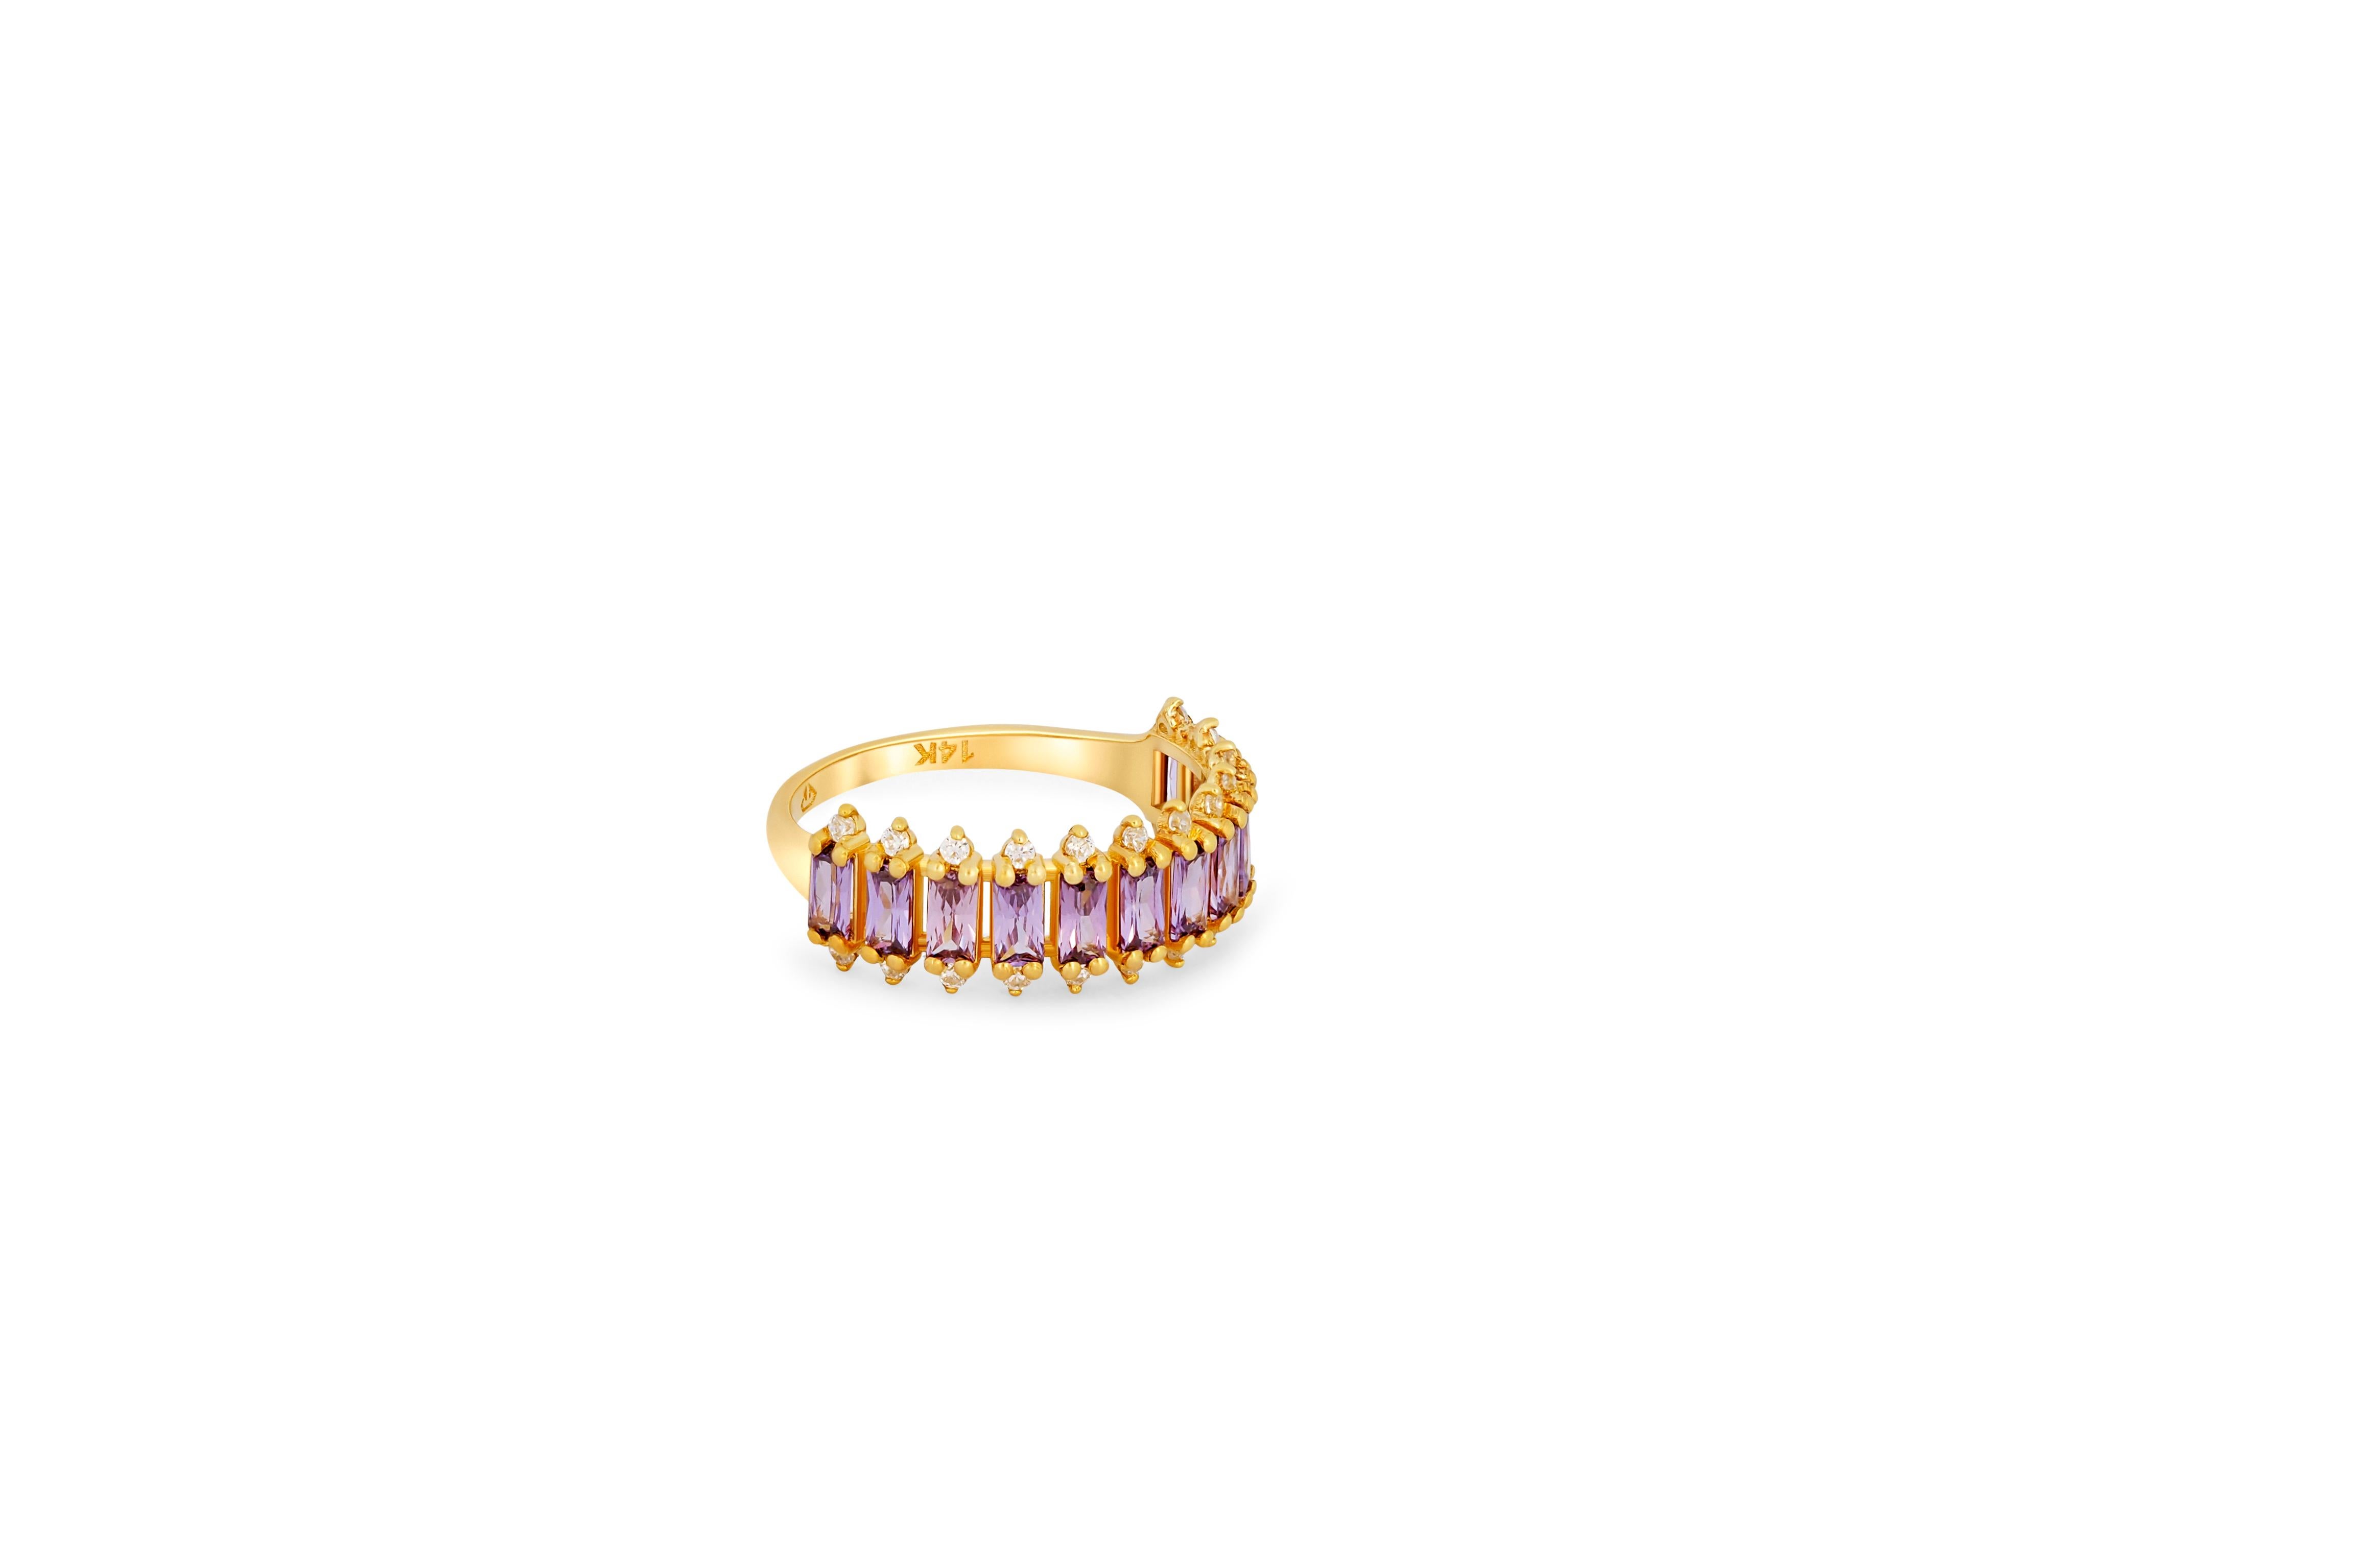 Lavender gems baguette 14k gold half eternity ring 14k gold ring with lab lavender/purple amethyst and moissanite.  Minimalist amethyst unisex ring. February Birthstone Rings. Semi-eternity delicate gold ring.

Metal: 14k gold
Weight: 2.2 gr depends